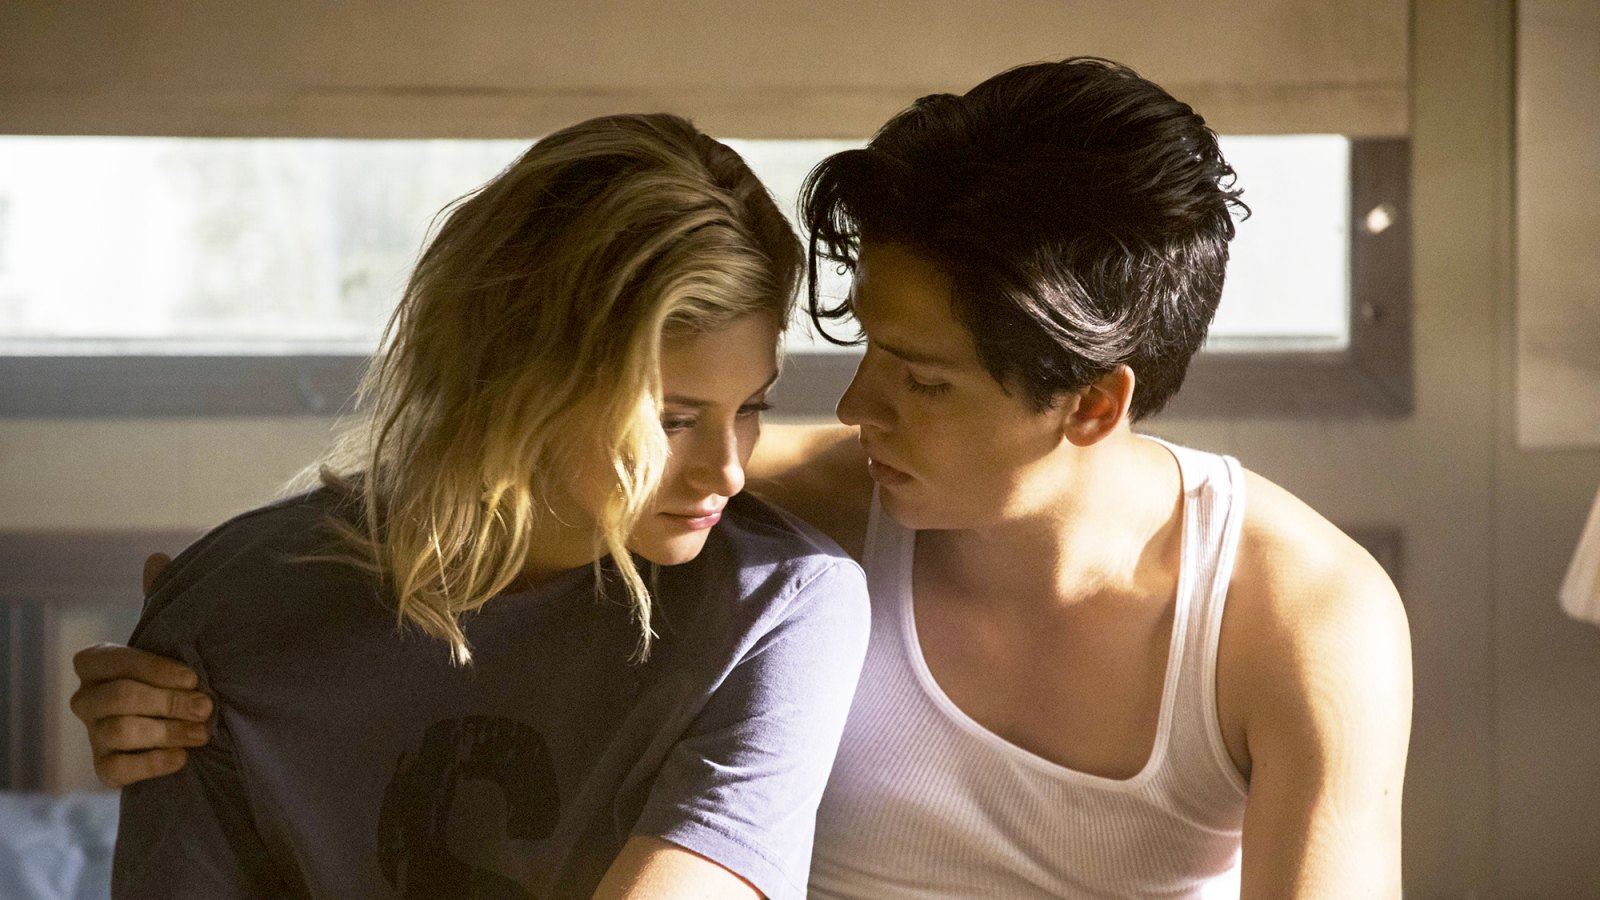 Lili Reinhart as Betty Cooper and Cole Sprouse as Jughead Jones on ‘Riverdale’